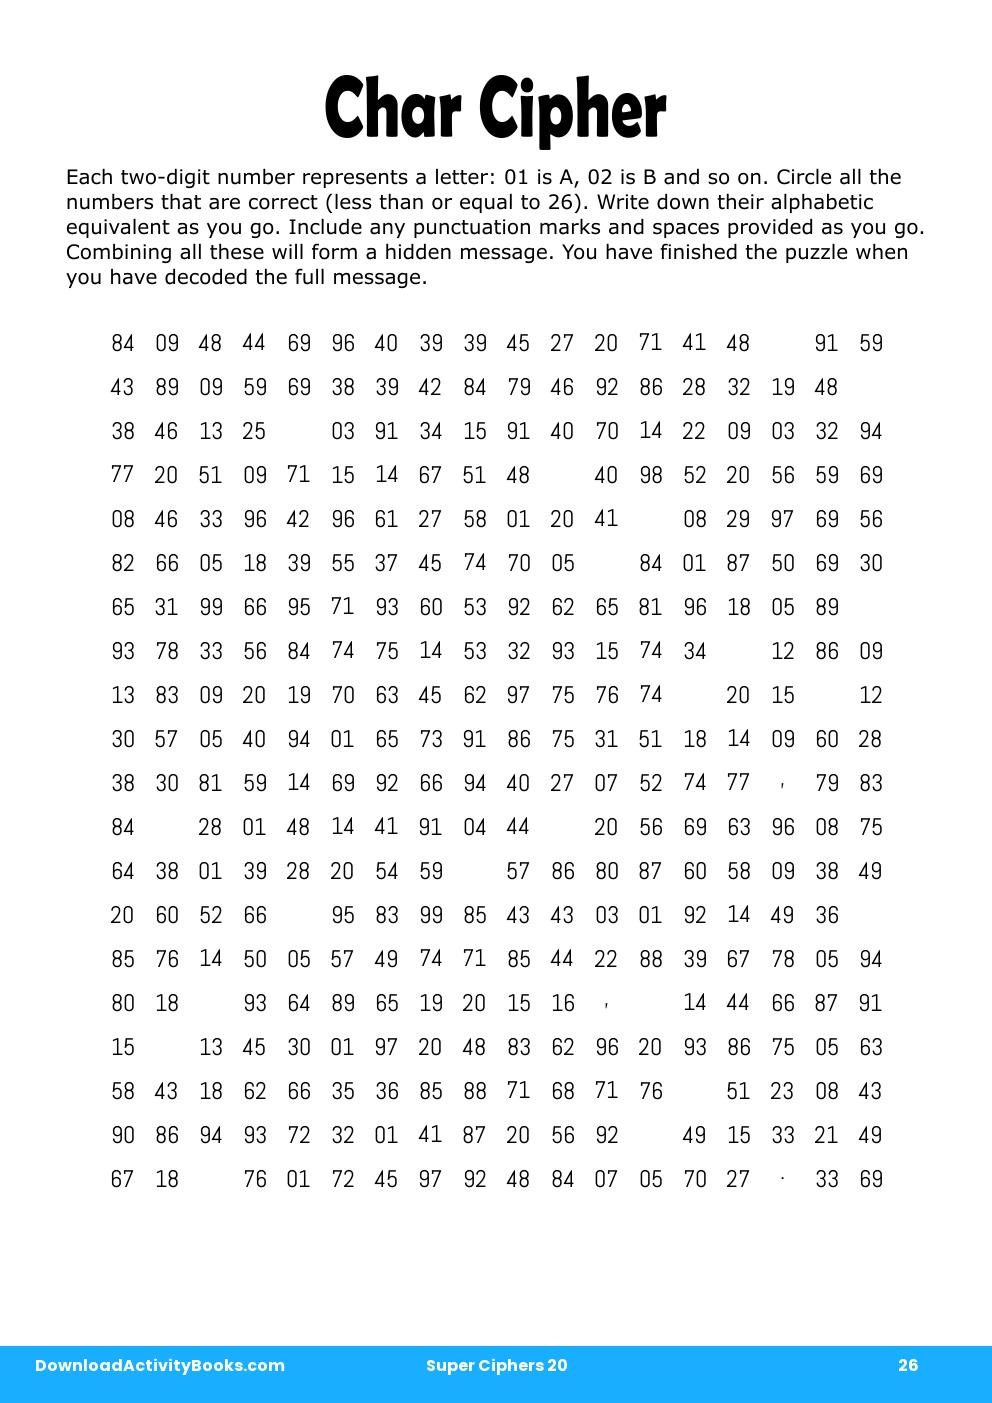 Char Cipher in Super Ciphers 20